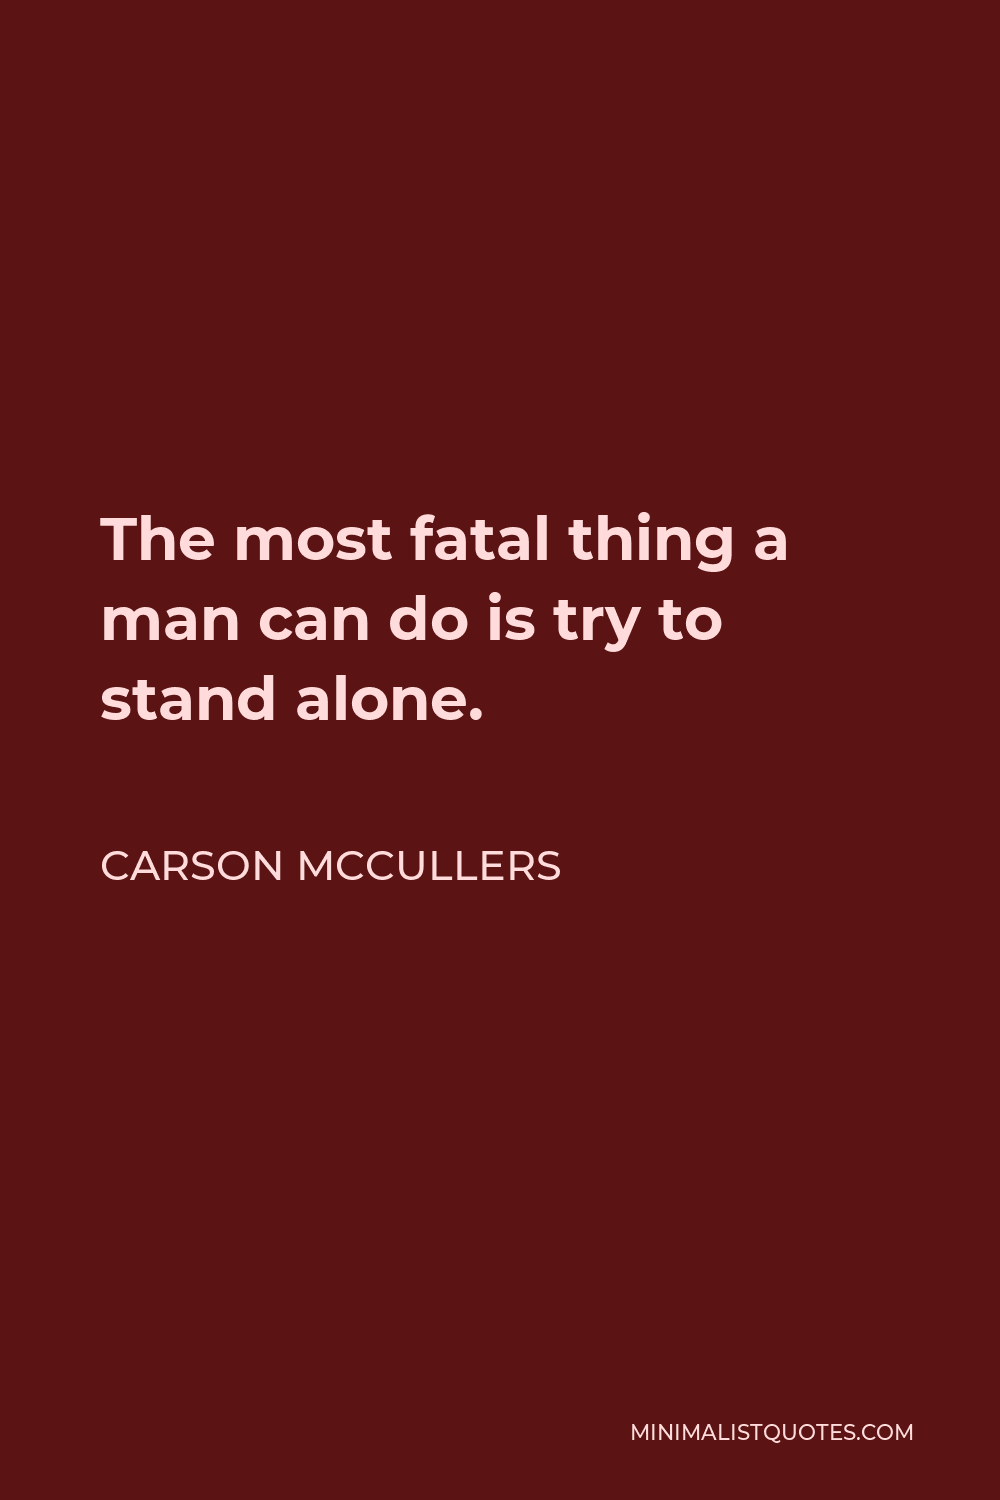 Carson McCullers Quote - The most fatal thing a man can do is try to stand alone.